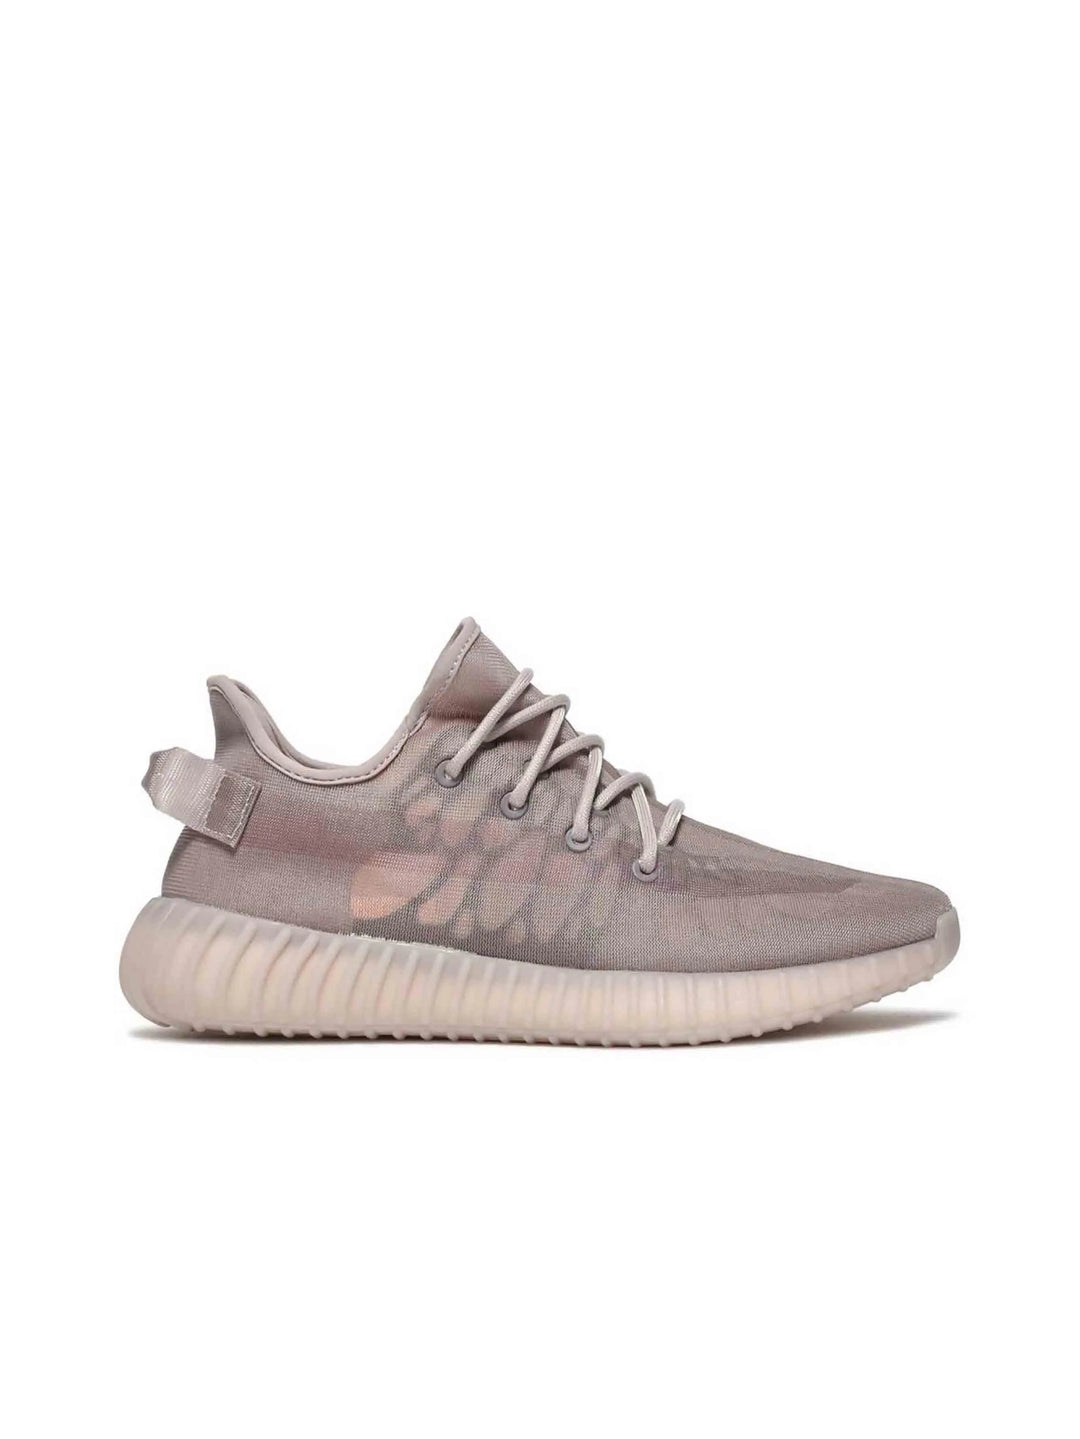 adidas Yeezy Boost 350 V2 Mono Mist in Auckland, New Zealand - Shop name